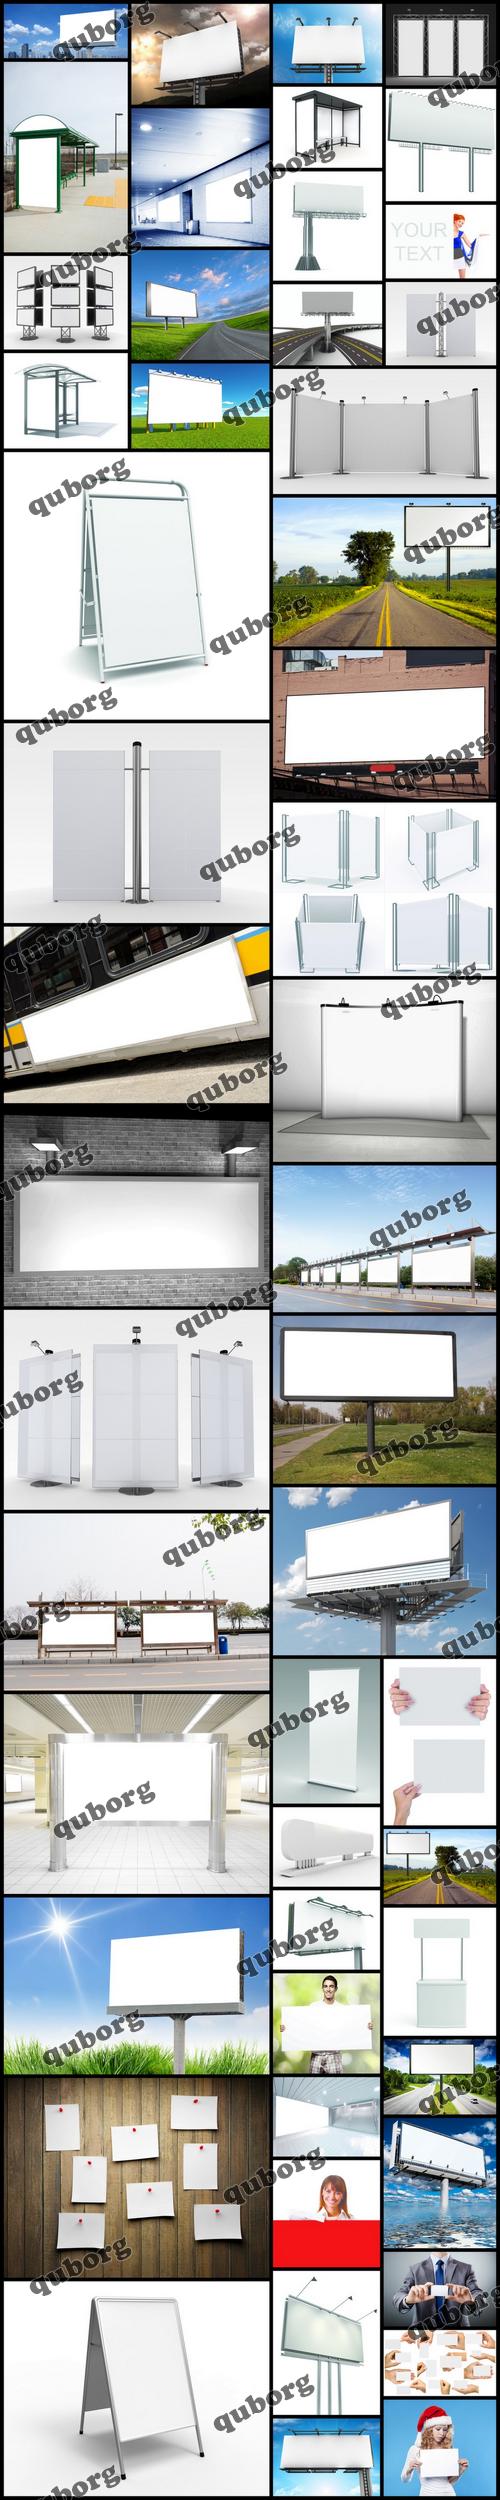 Stock Photos - Advertising Stands and Billboards